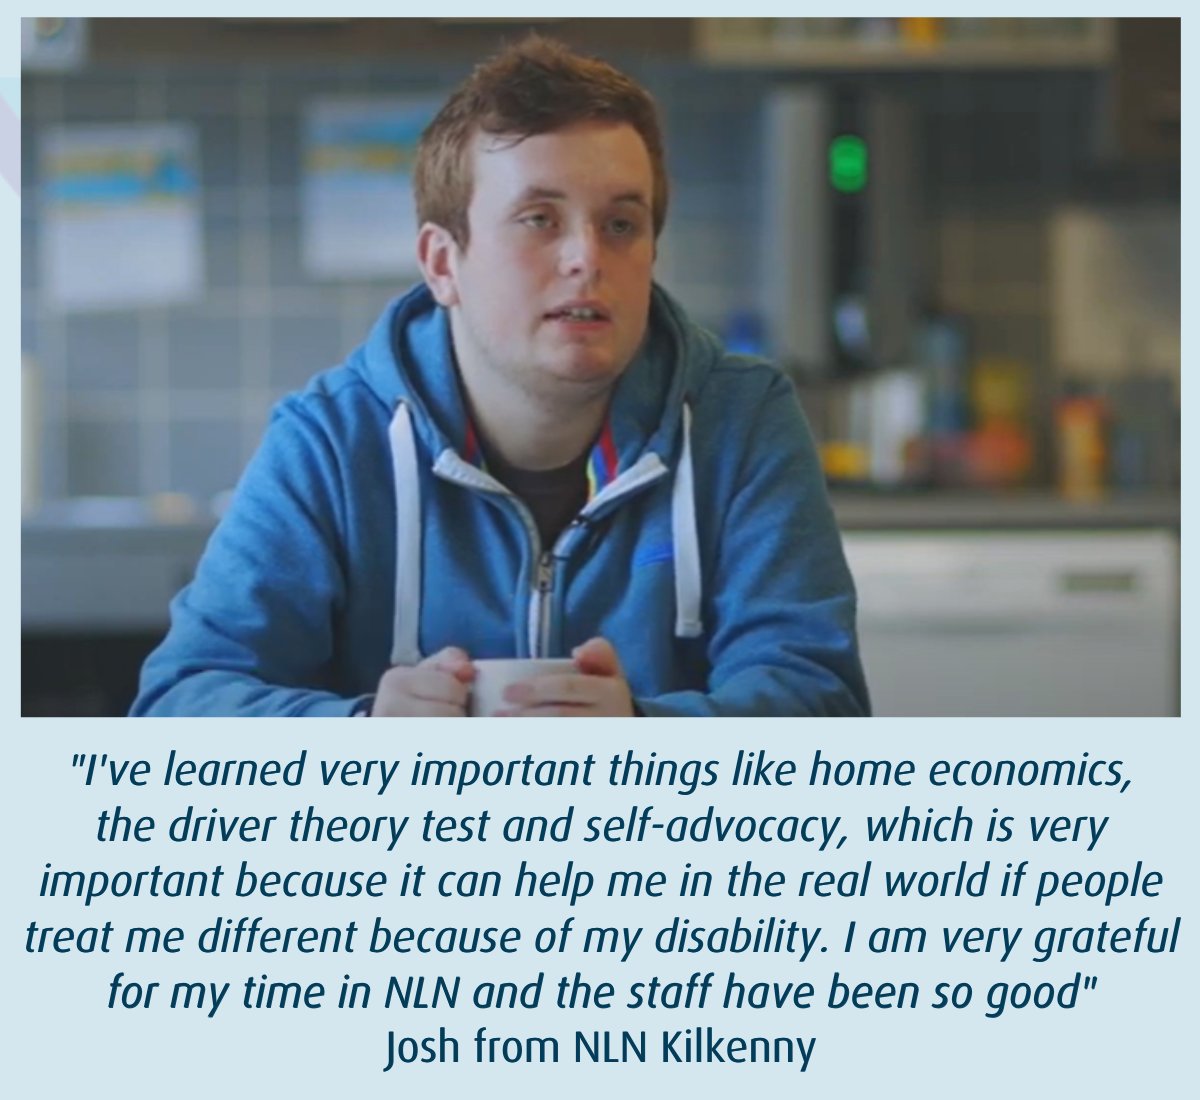 Josh's amazing testimonial about his experience of National Learning Network Kilkenny
#ThinkPossible #Kilkenny #StudentSupports #SupportedEducation #FlexibleEducation #FurtherEducation #FET #Students #Disability #DisabilityInclusion